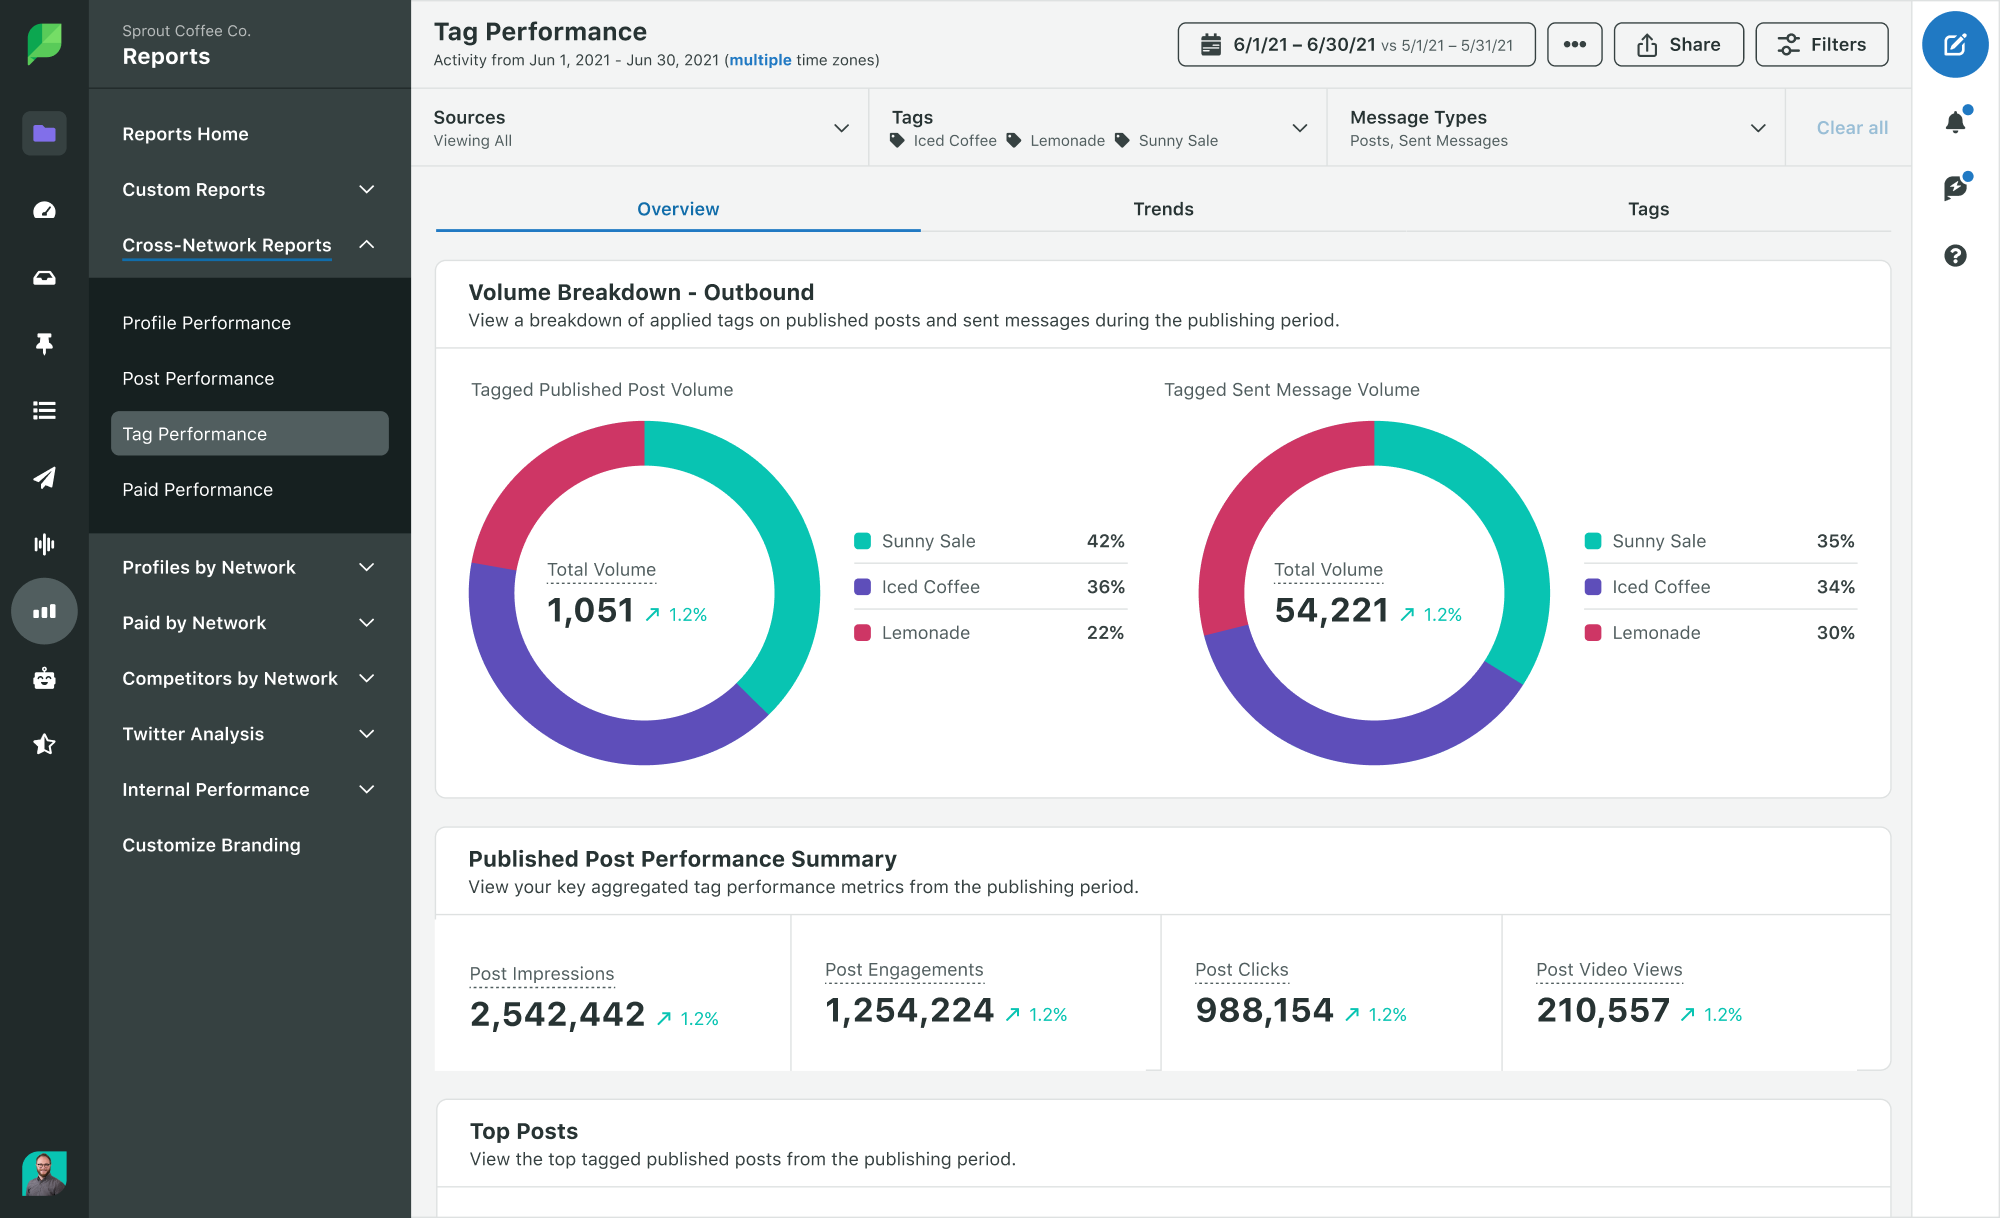 Sprout Social Product Image of Analytics Cross-Channel Tag Report